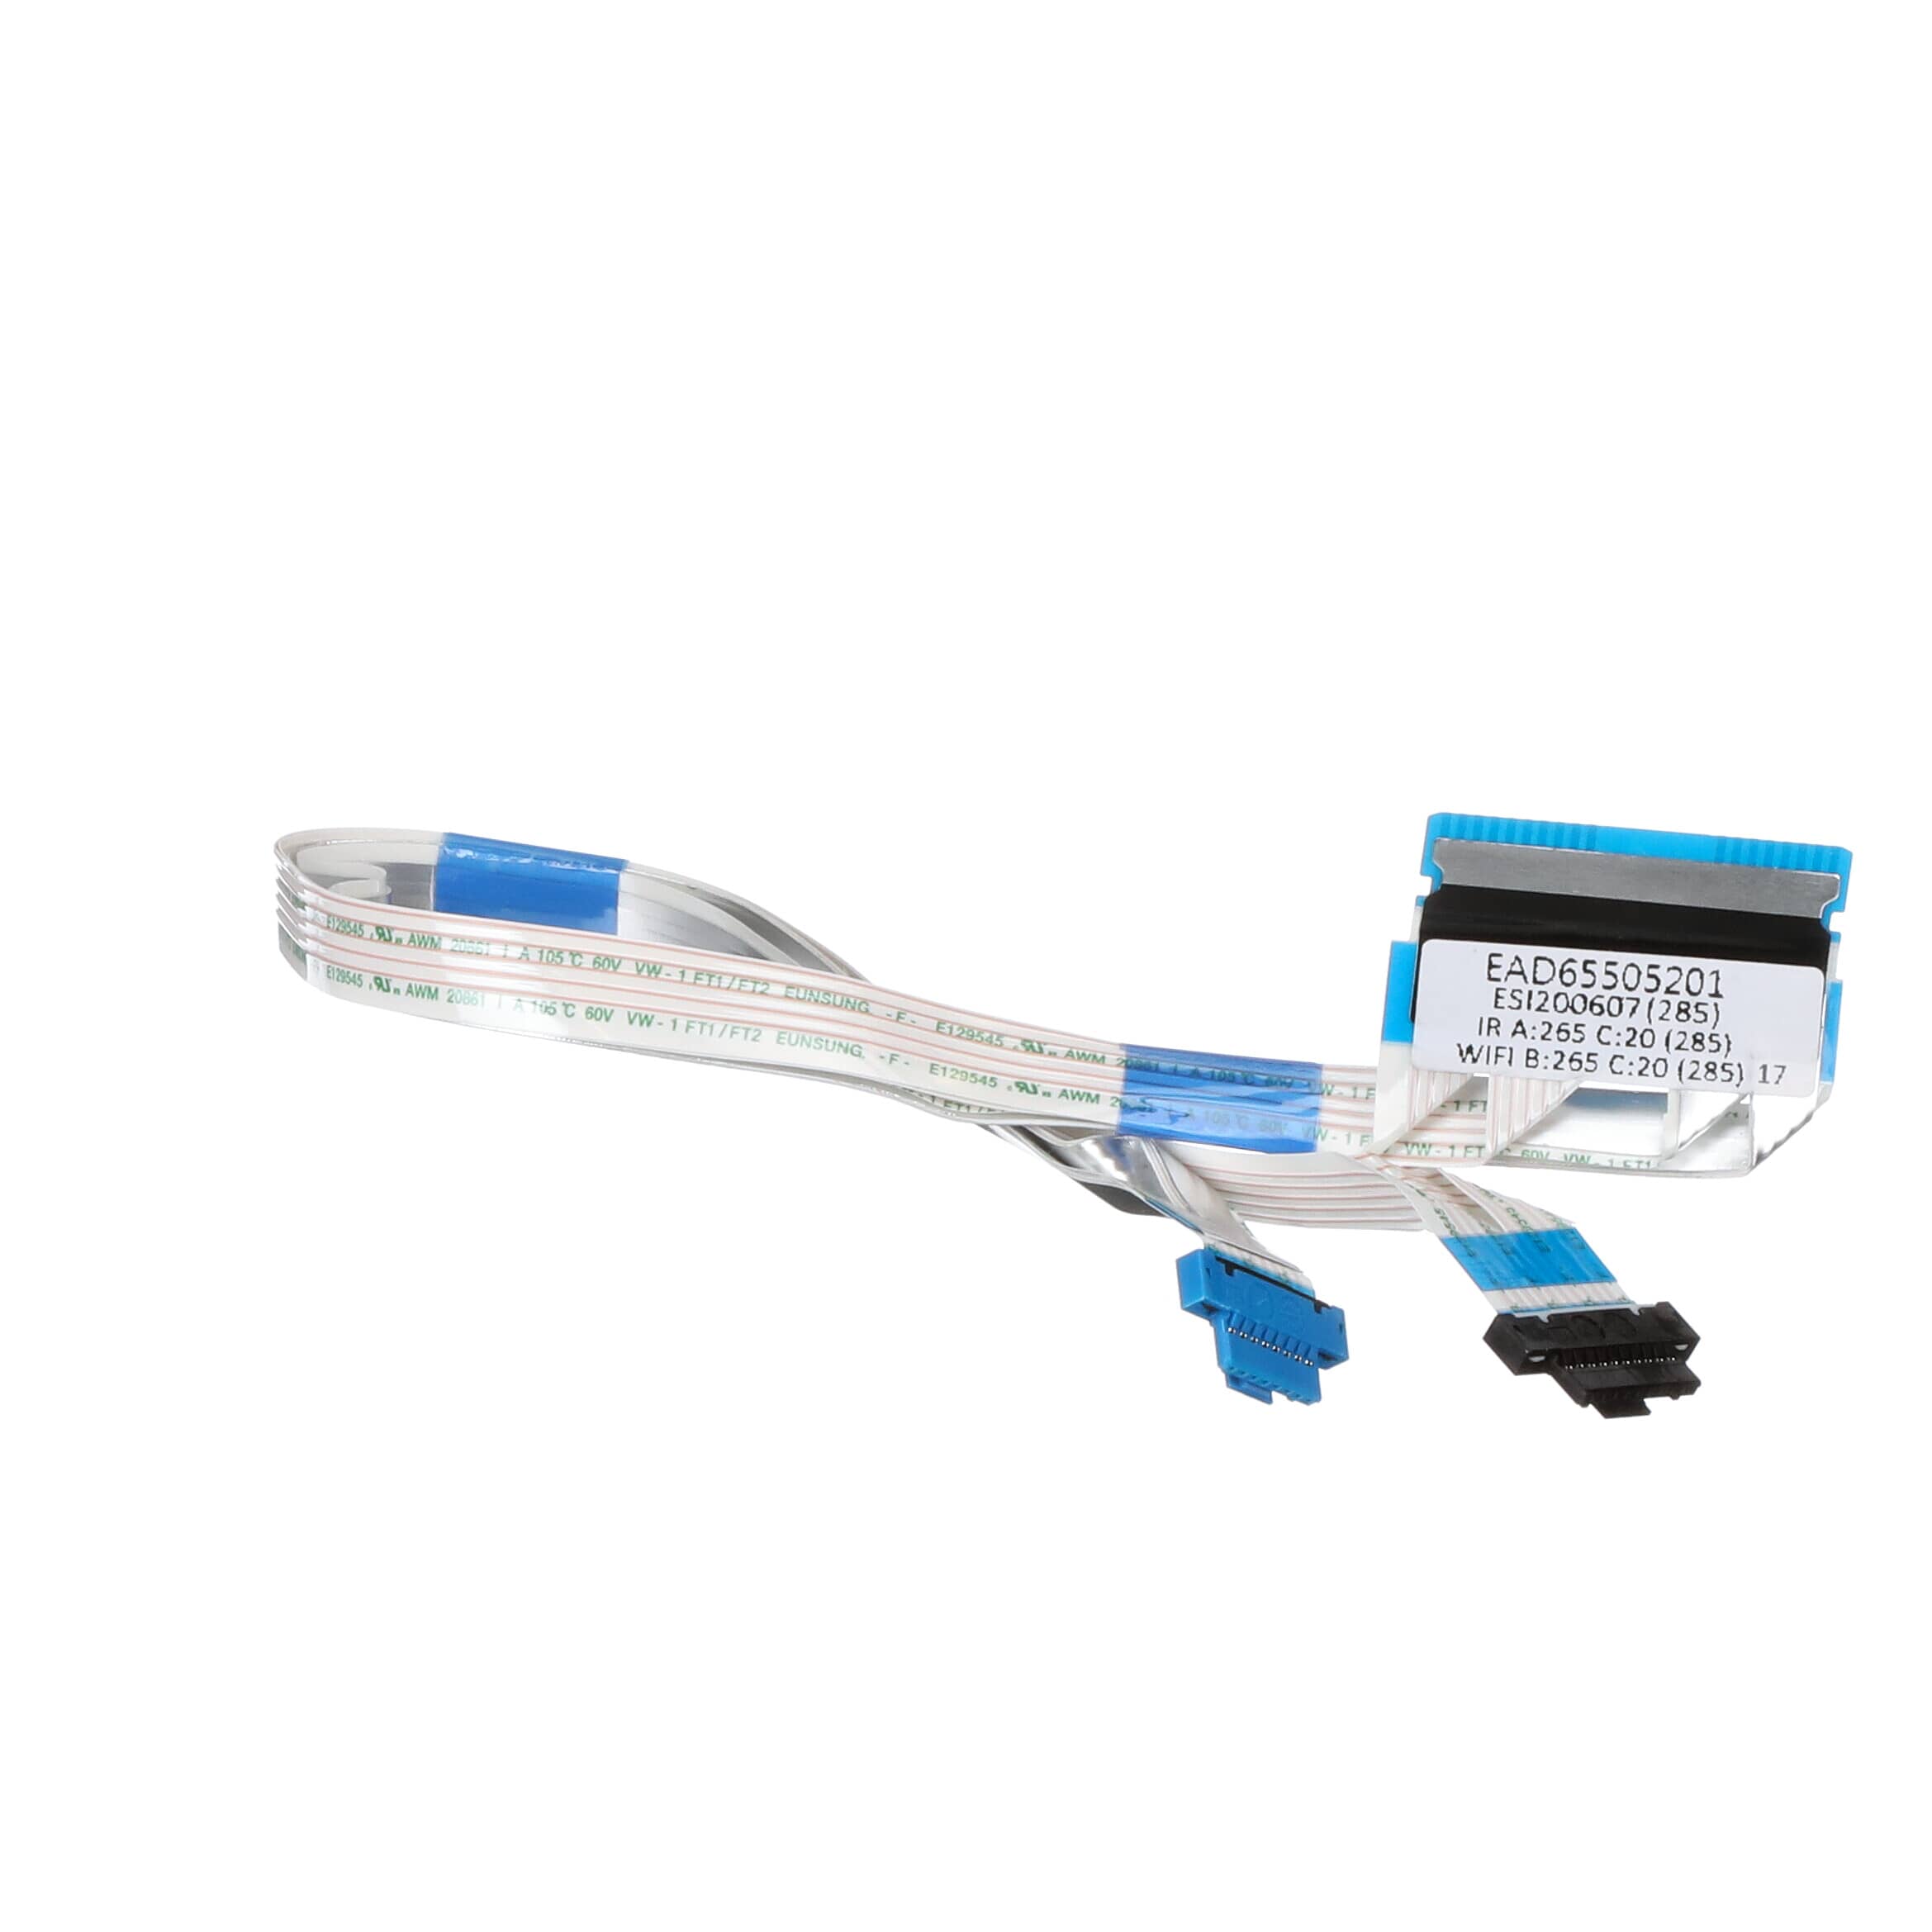 LG EAD65505201 Ffc Cable